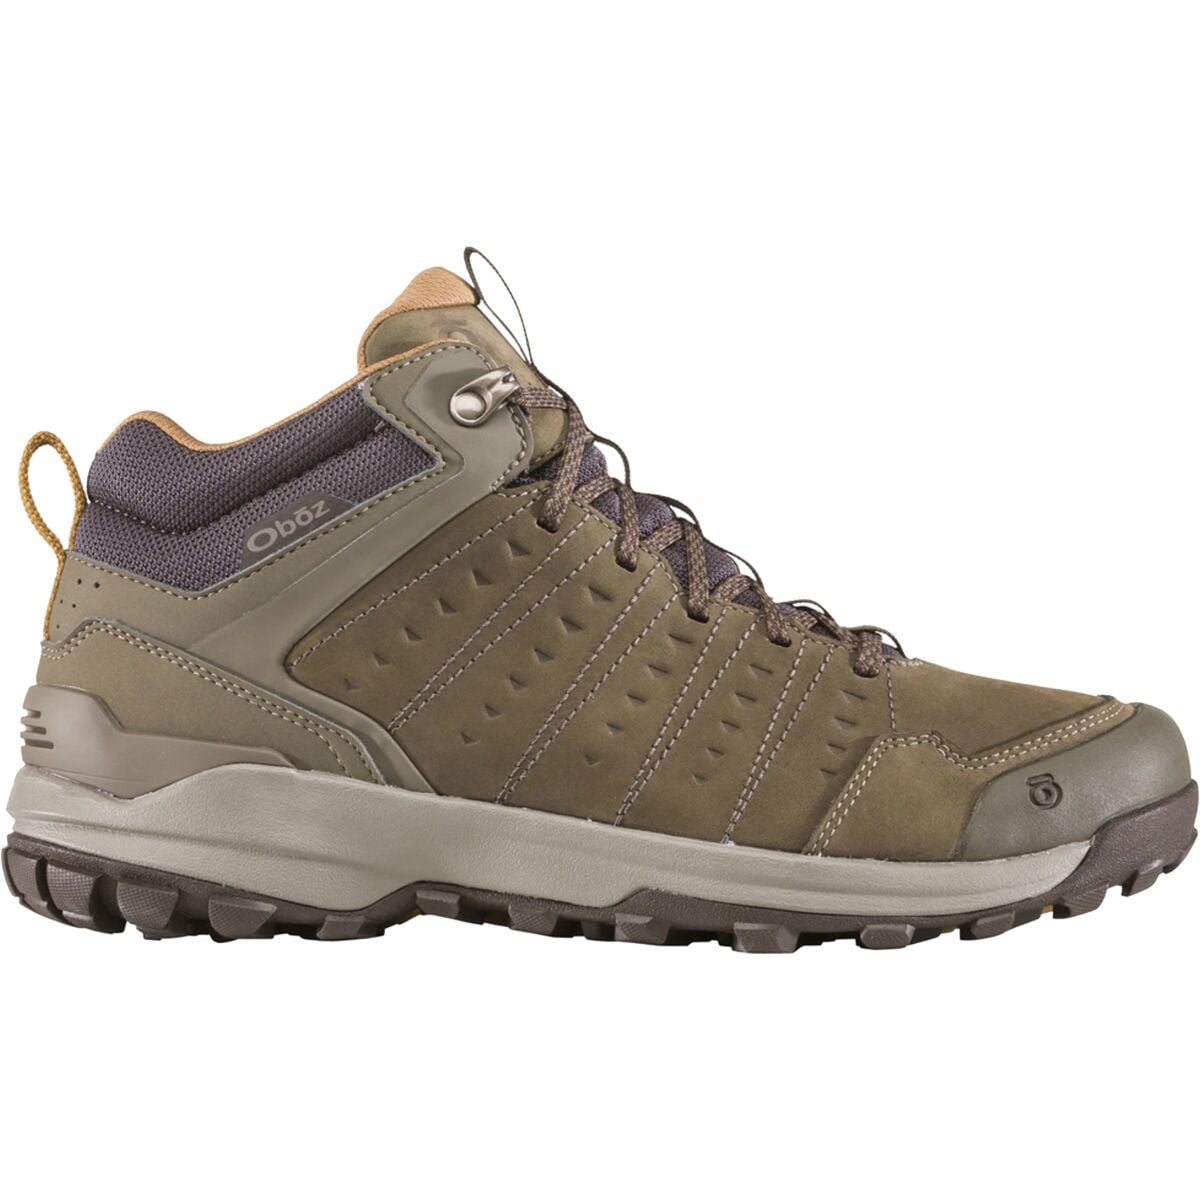 Sypes Mid Leather Waterproof Hiking Boot - Men